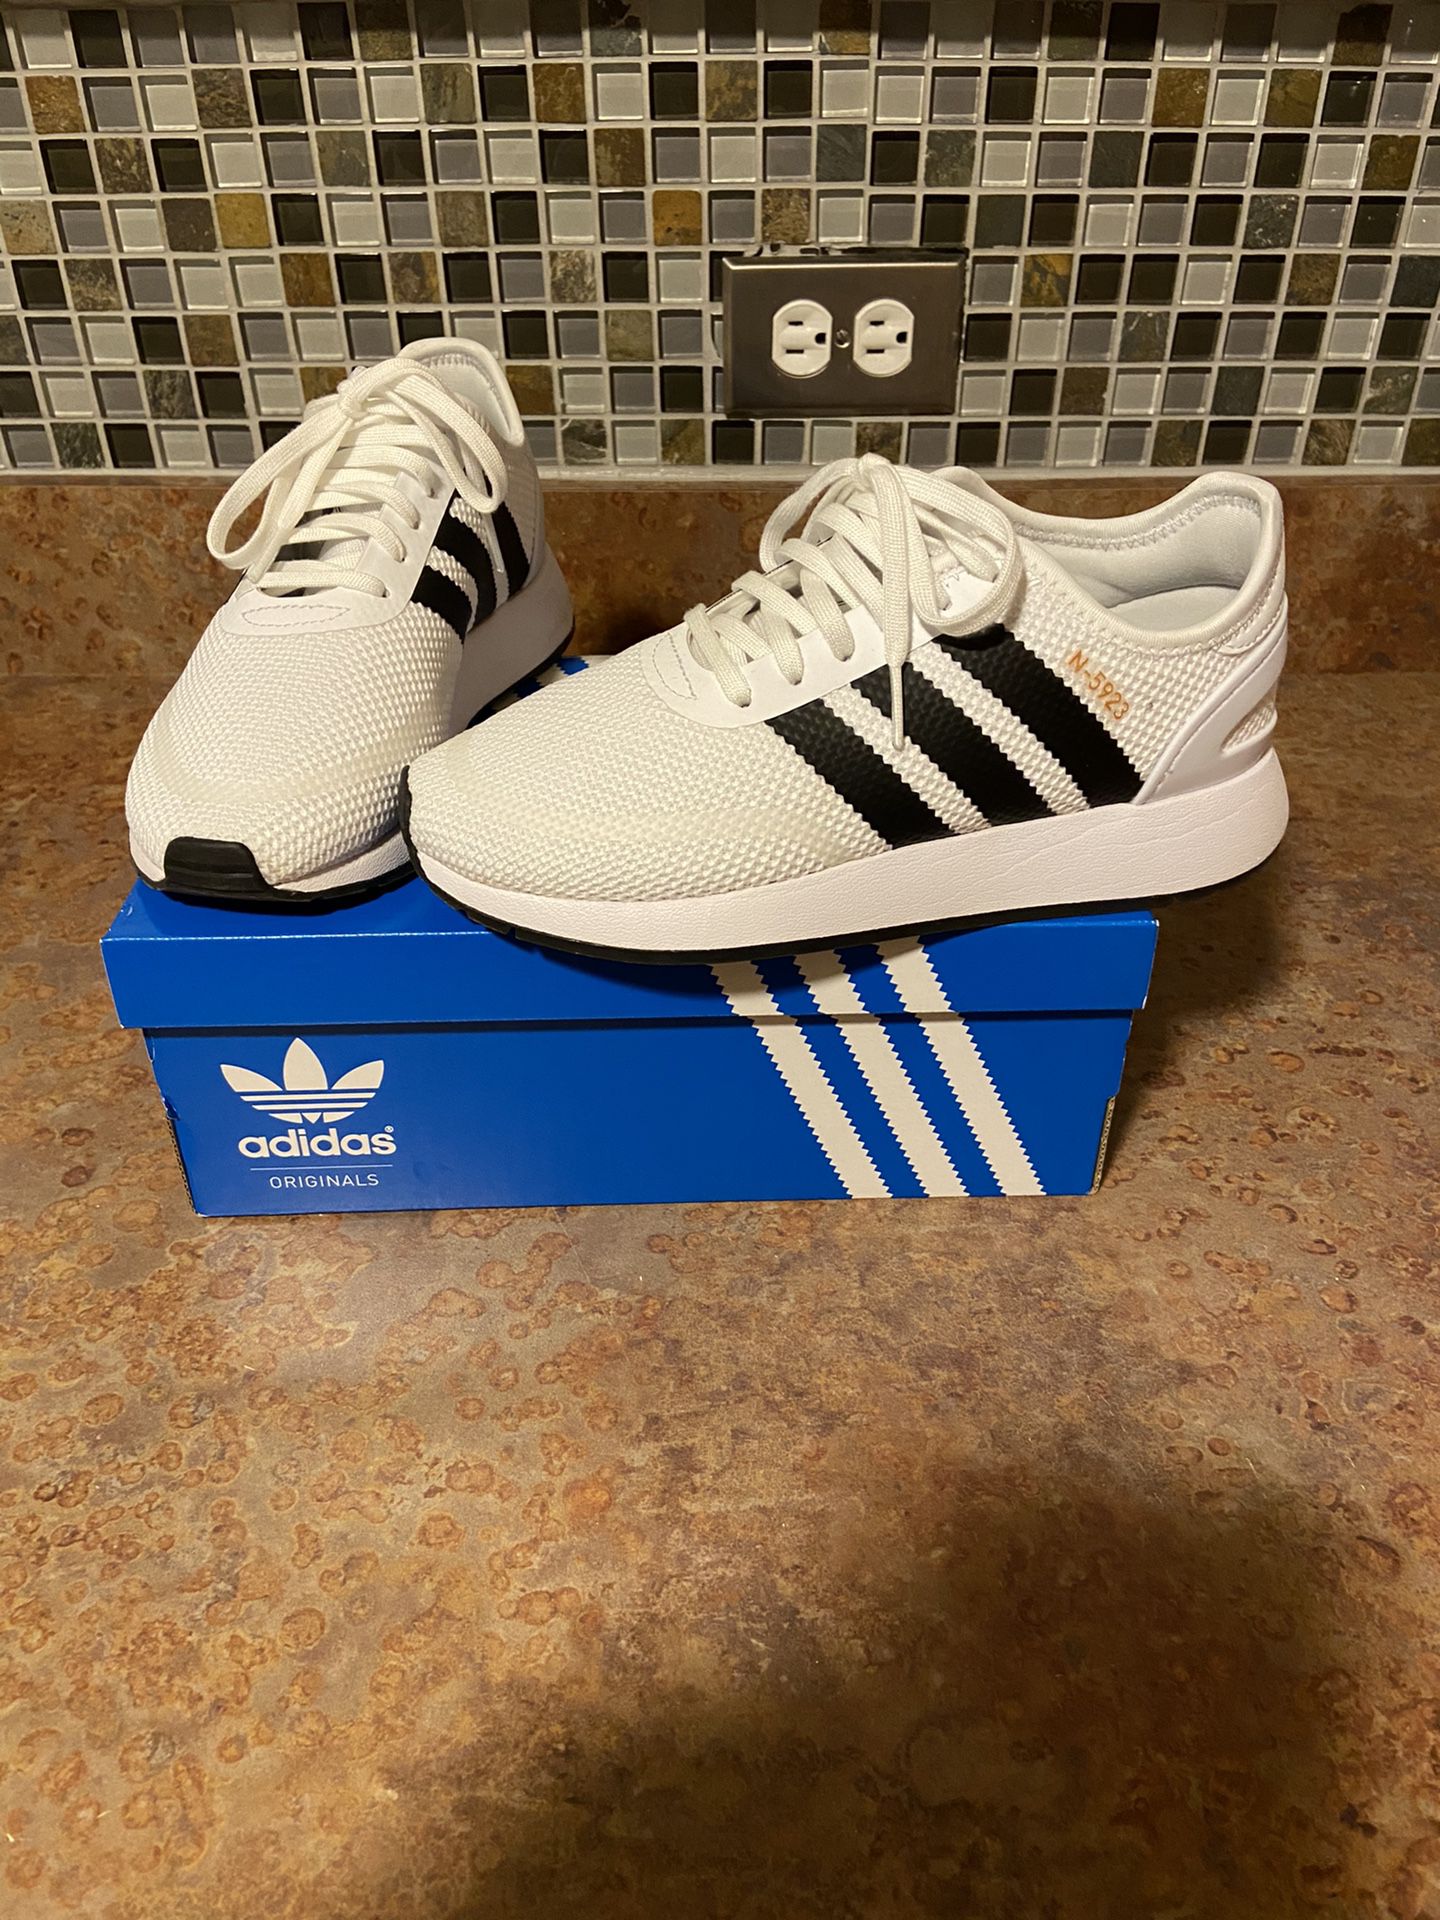 White and black adidas N5923 size 5 youth only worn once.